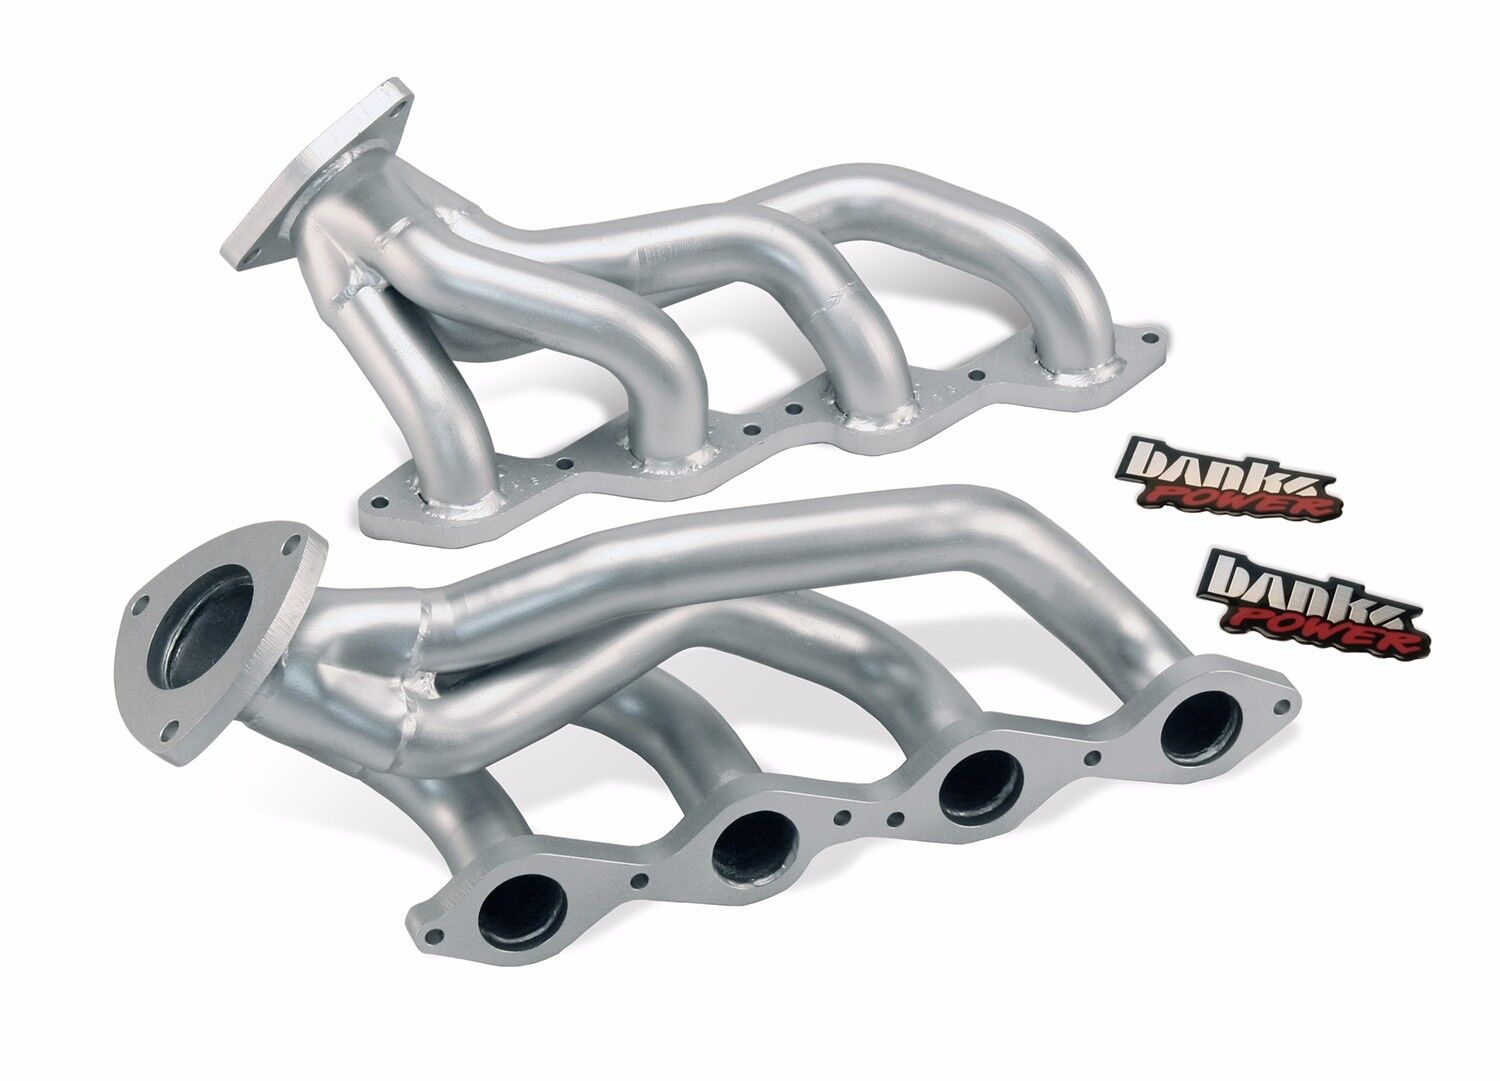 BANKS HEADERS 99-01 CHEVY GMC TRUCKS SUV\'s 4.8 5.3 NON-AIR INJECTED